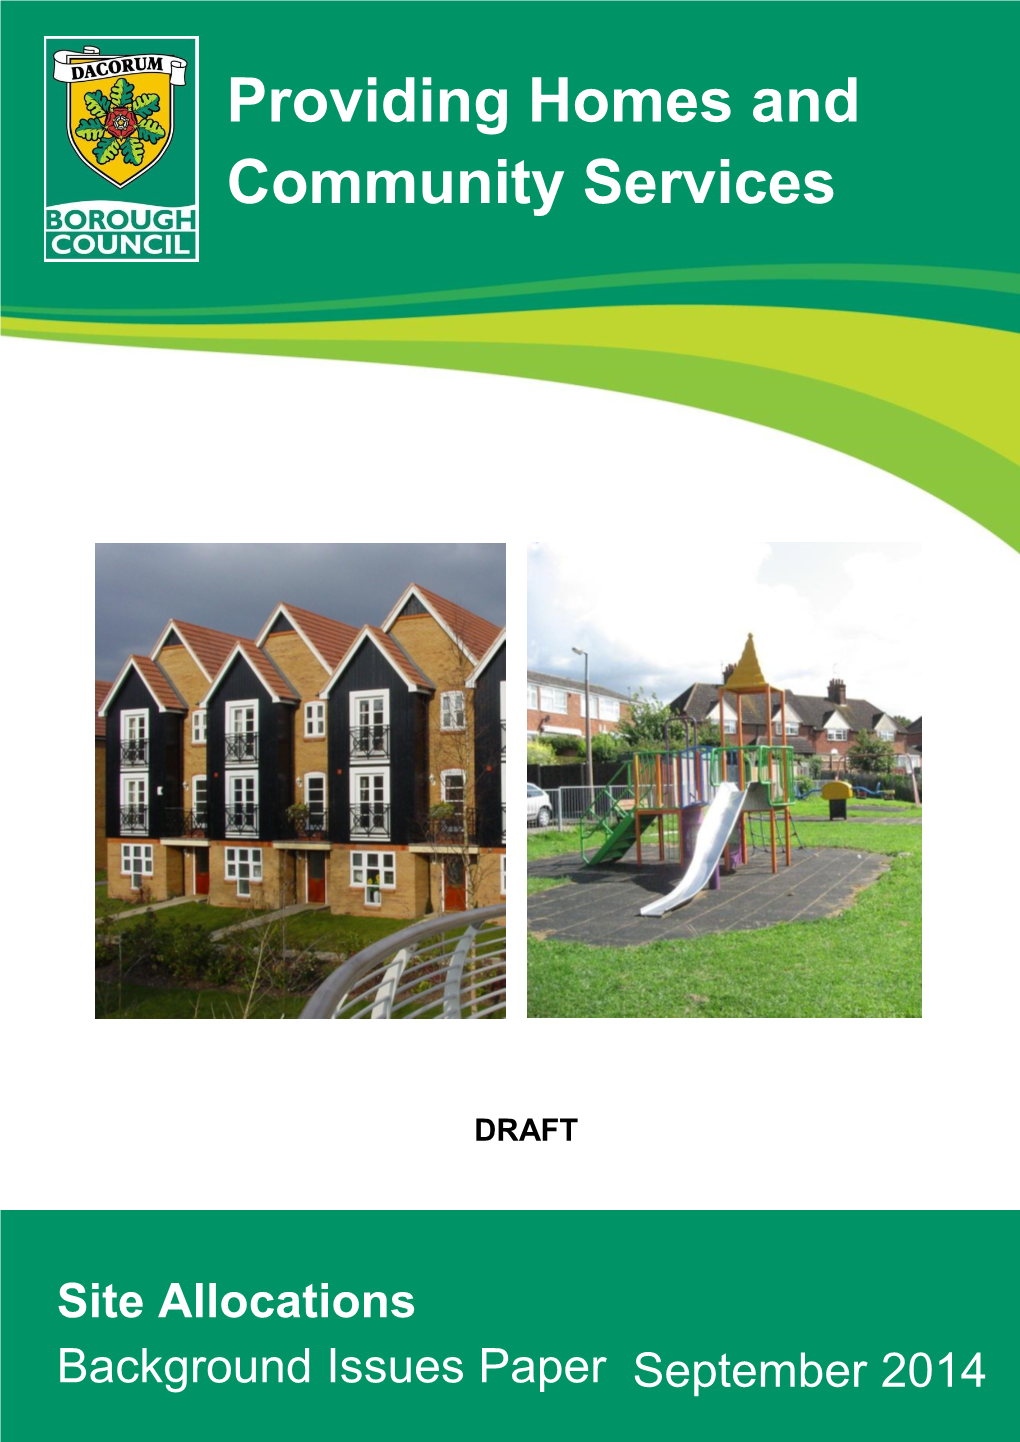 Background Issues Paper Providing Homes and Community Services